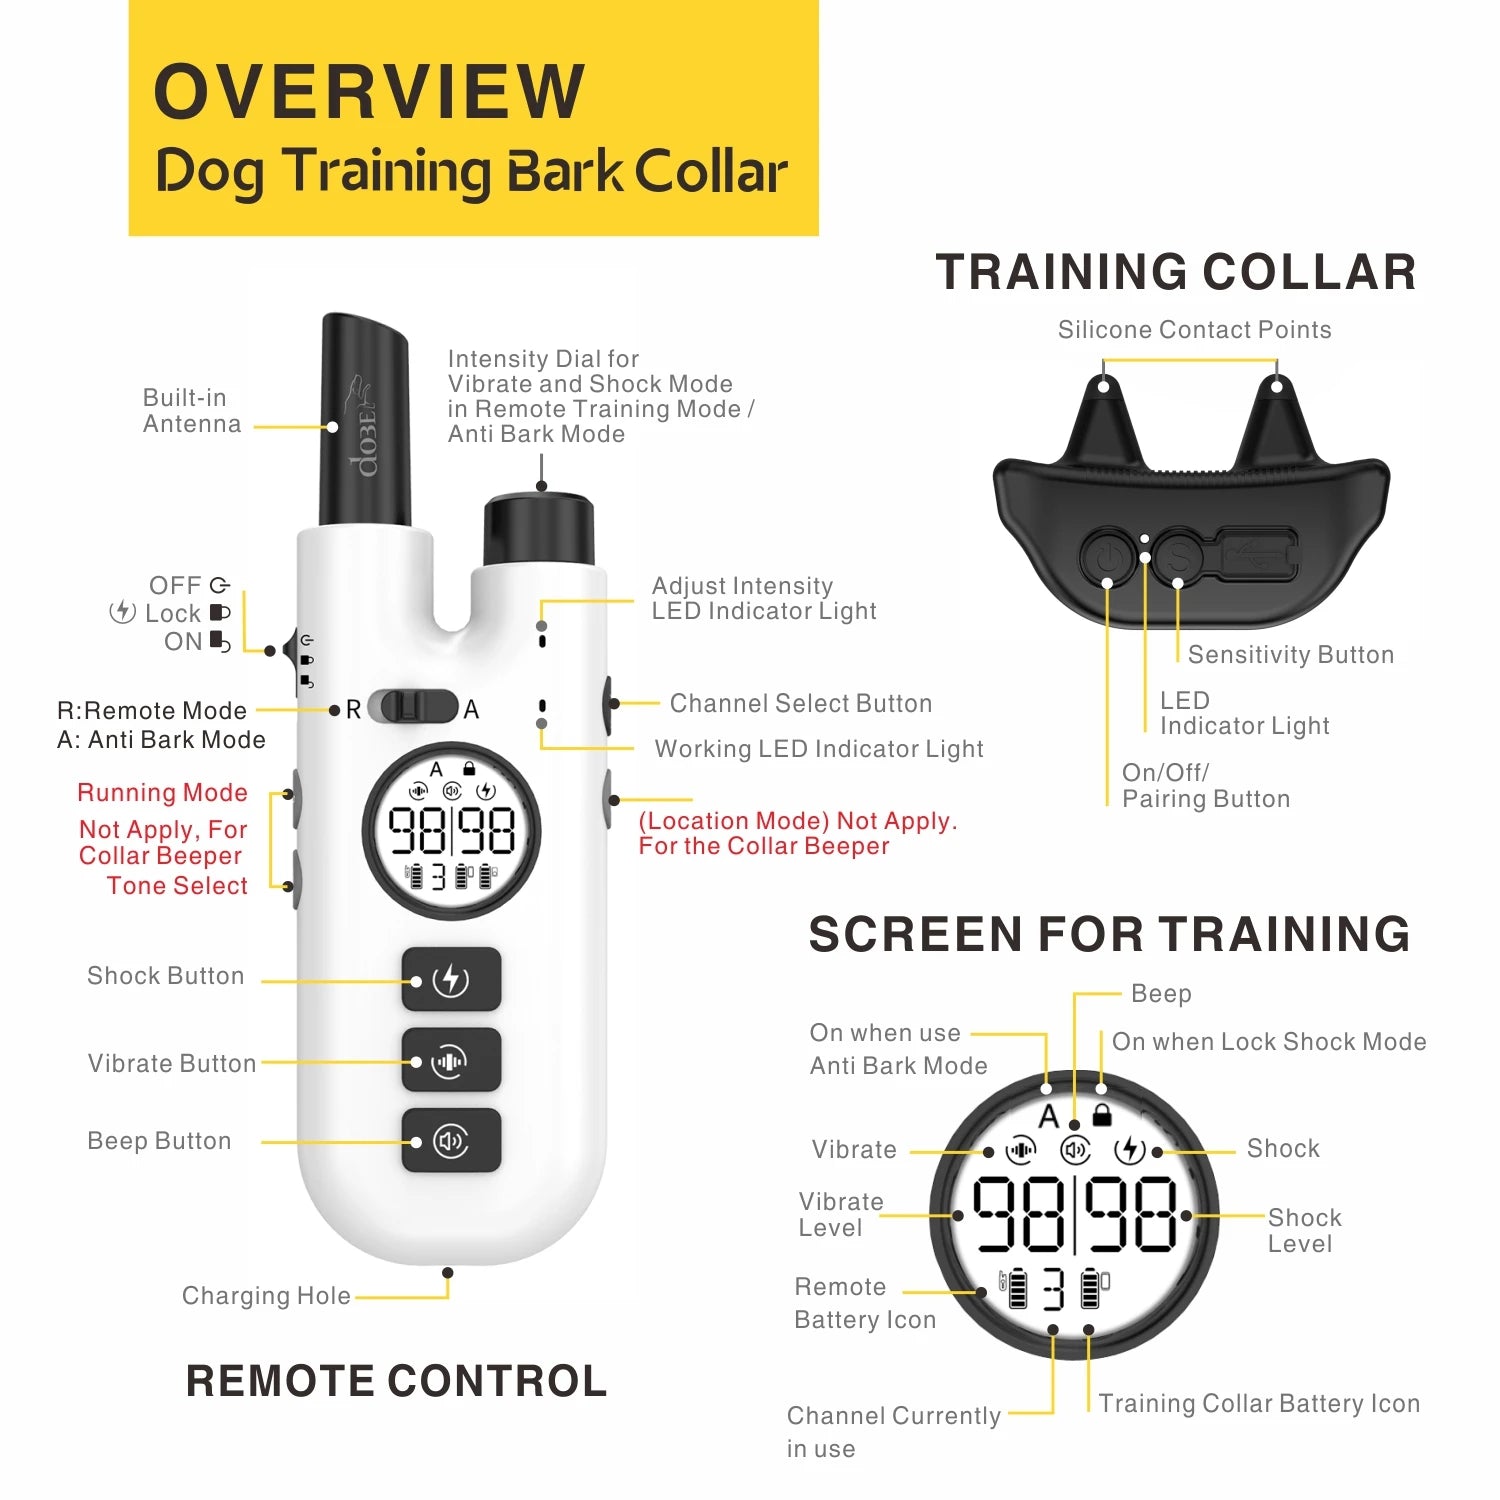 Dog Training Bark Collar with Remote Control: Train Your Dog with Ease  petlums.com   